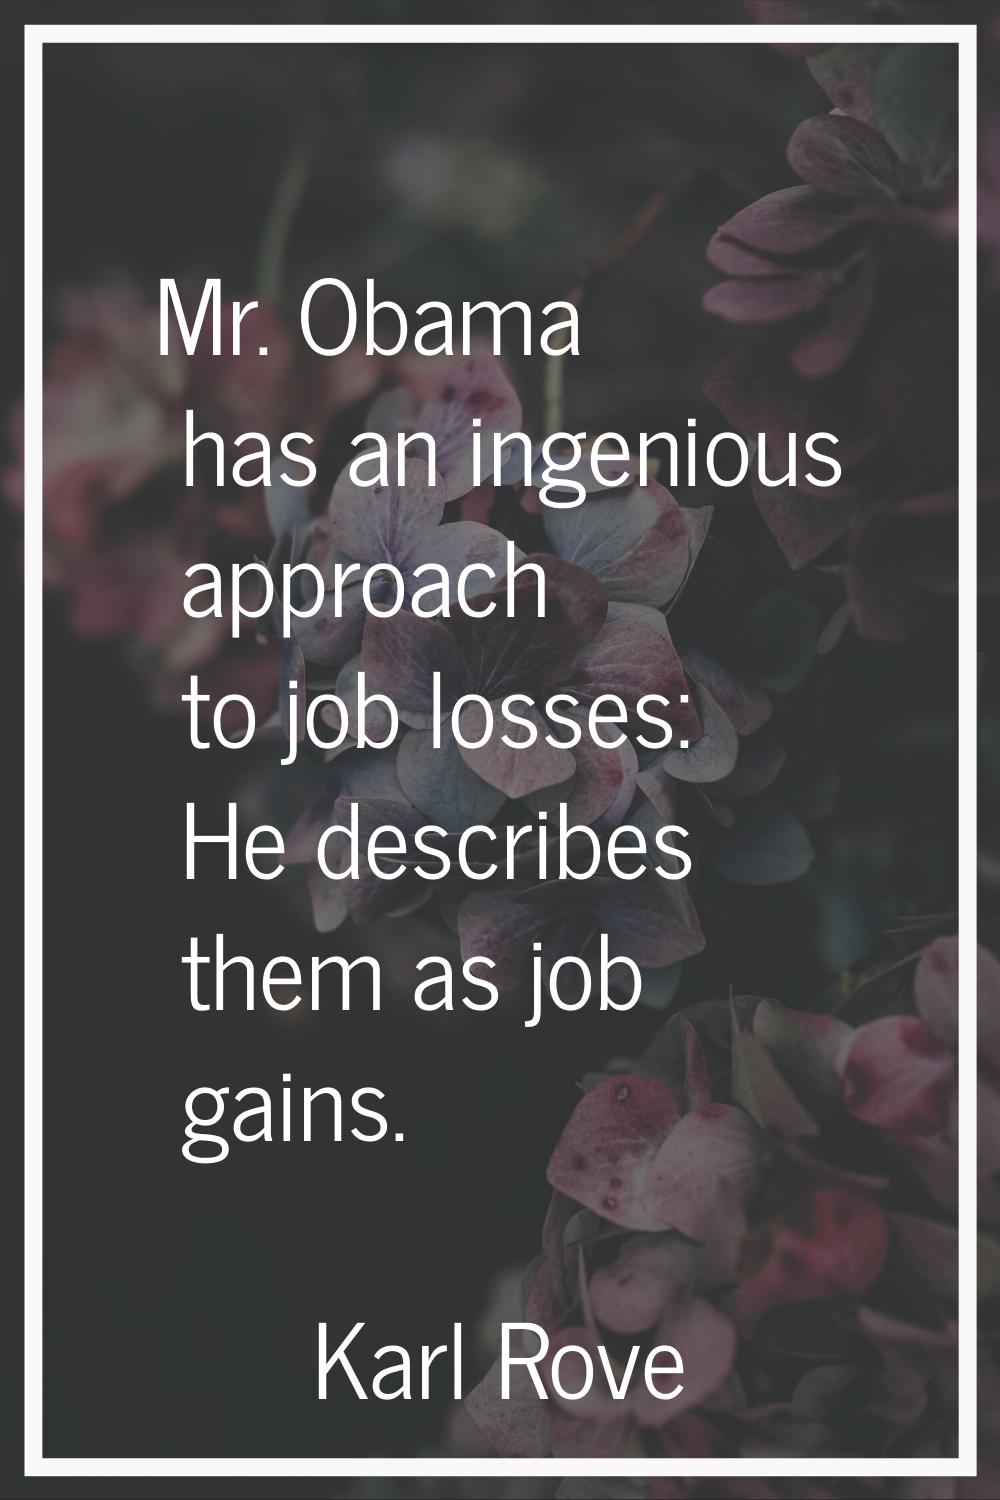 Mr. Obama has an ingenious approach to job losses: He describes them as job gains.